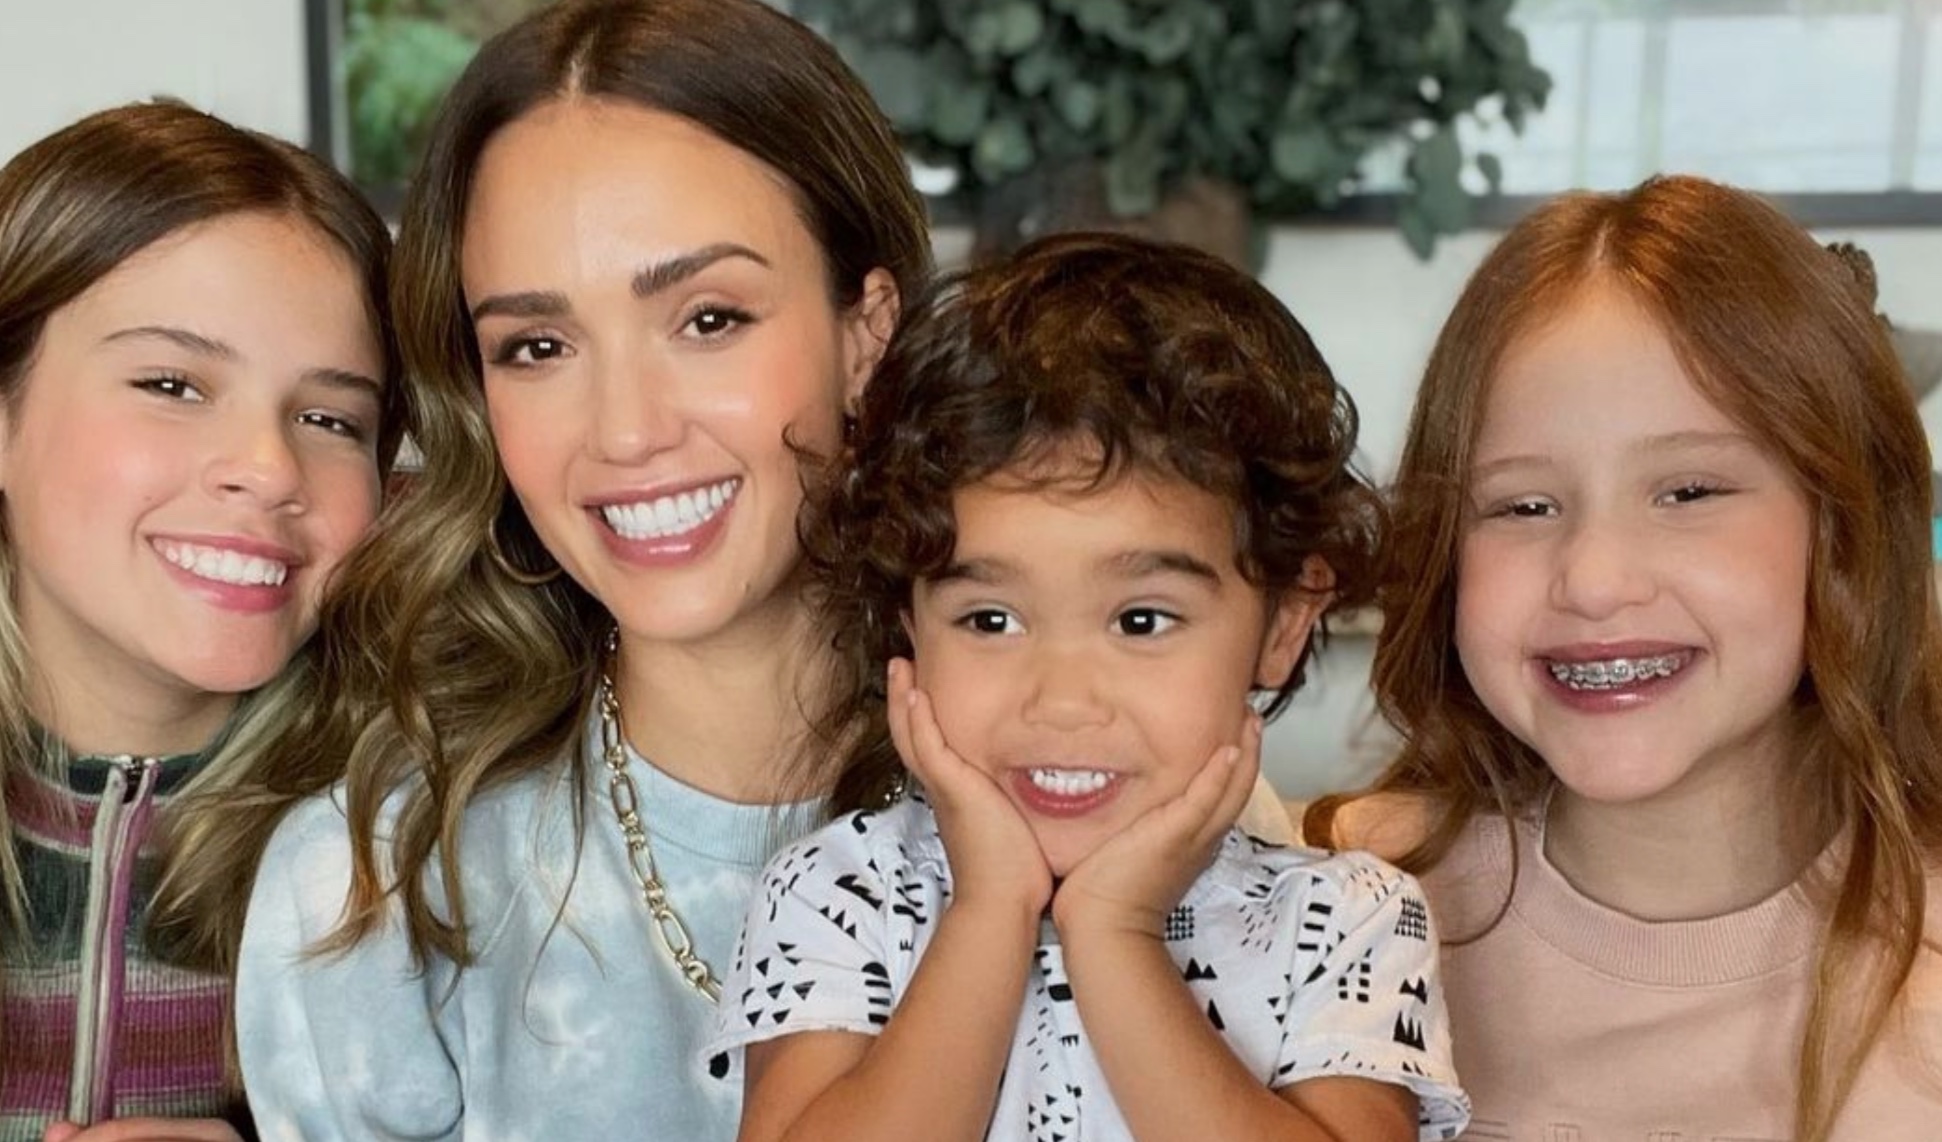 Jessica Alba, Daughter, 13, Look Like Twins In New Video